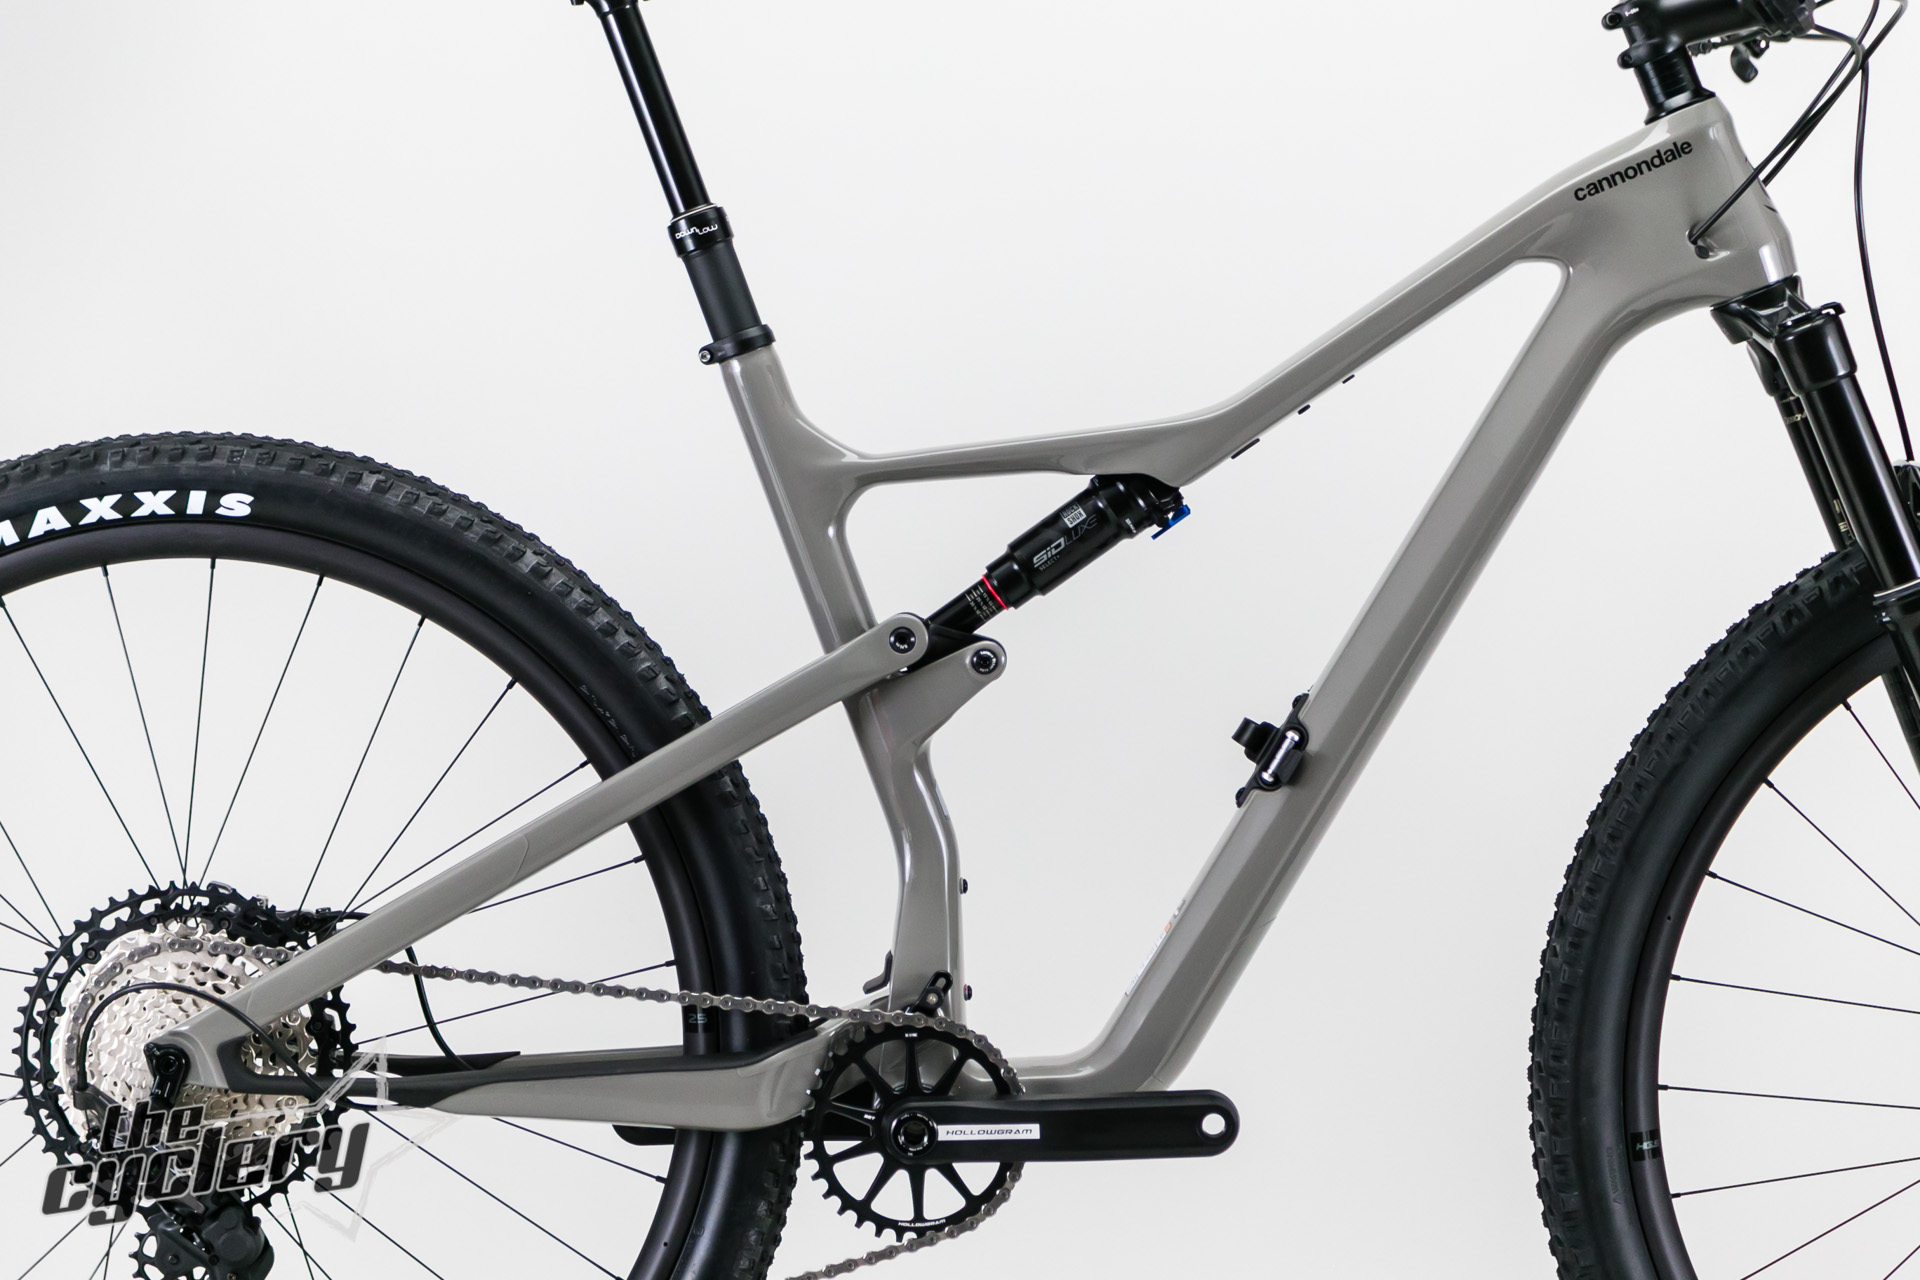 grootmoeder pindas dauw Cannondale Scalpel Carbon SE 1 29" Trail Bike 2021 | The Cyclery